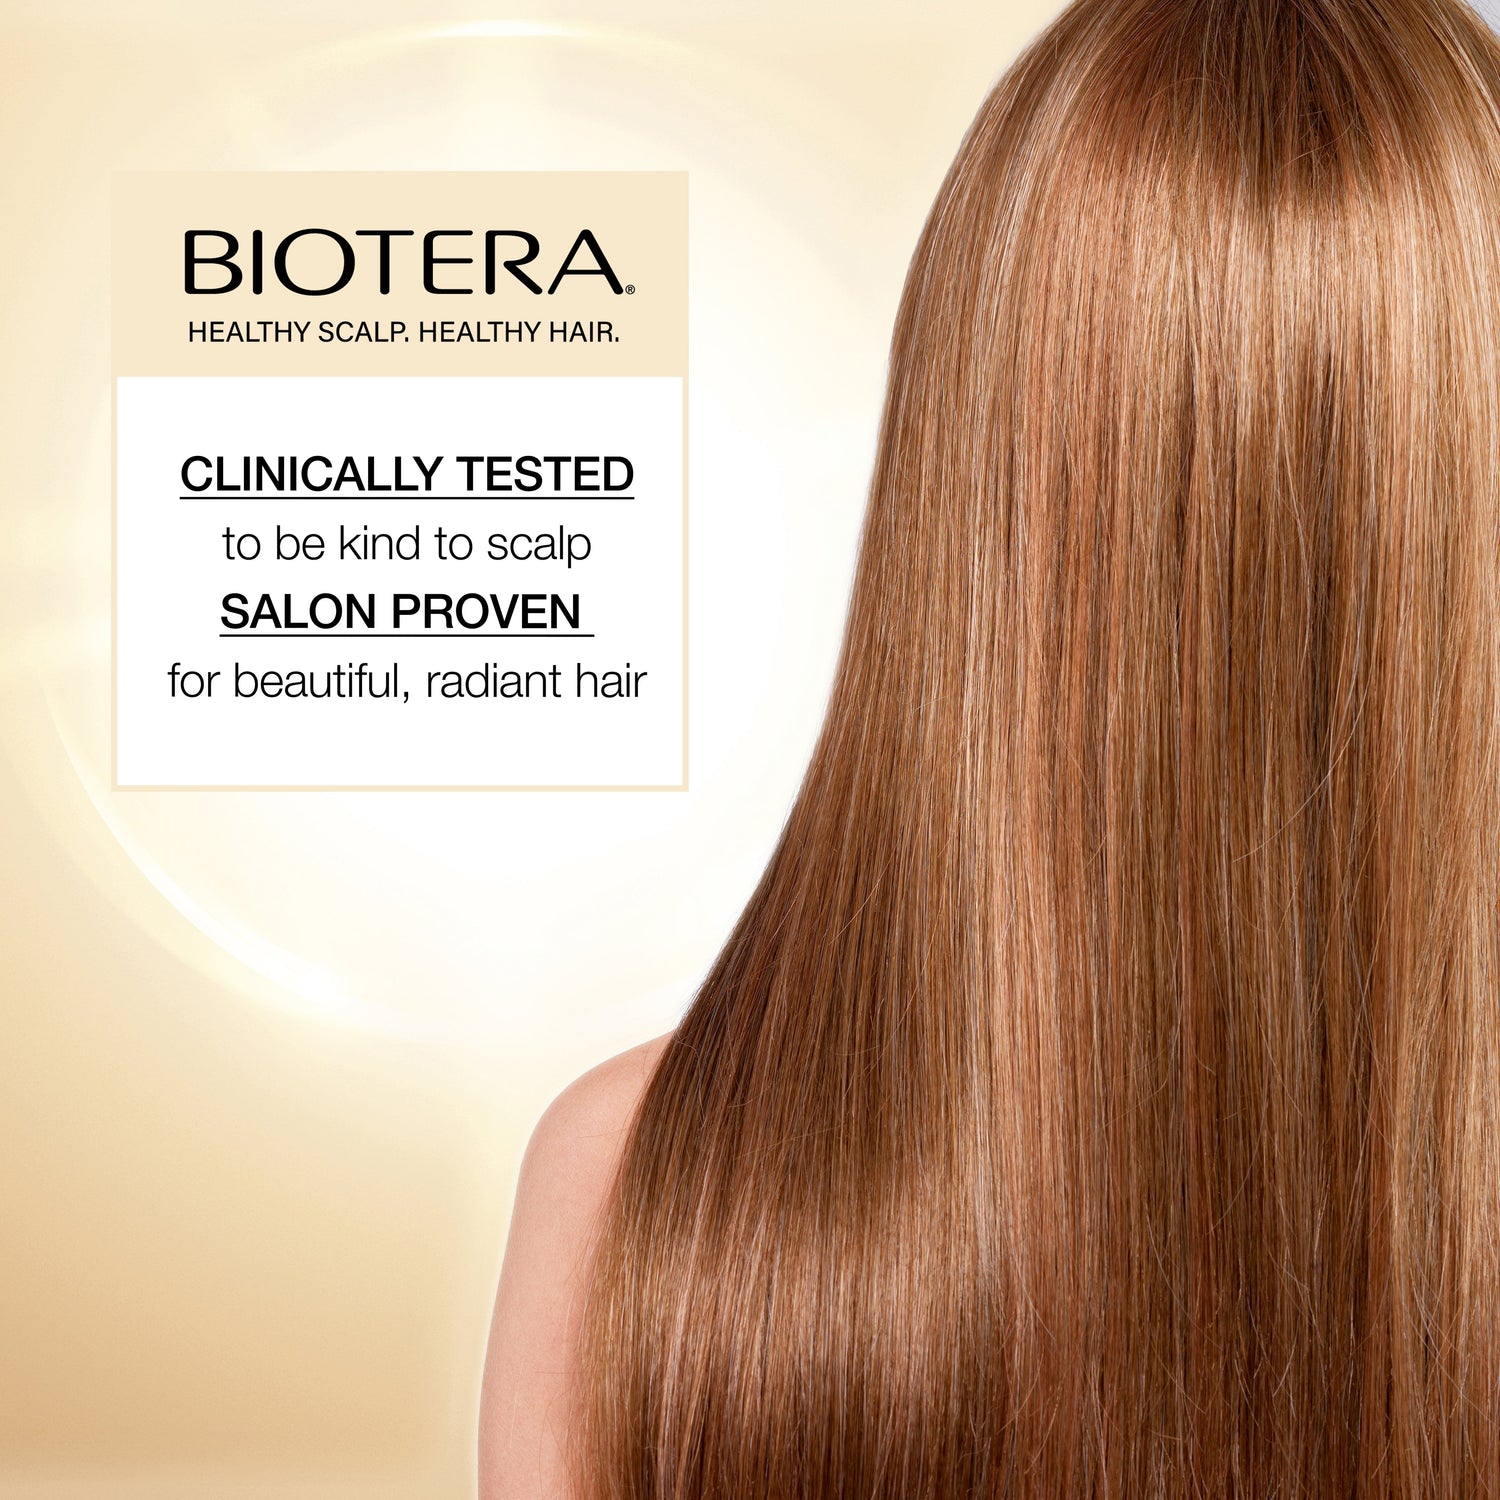 Biotera flexible hold finishing spritz hairspray is clinically tested and salon proven.